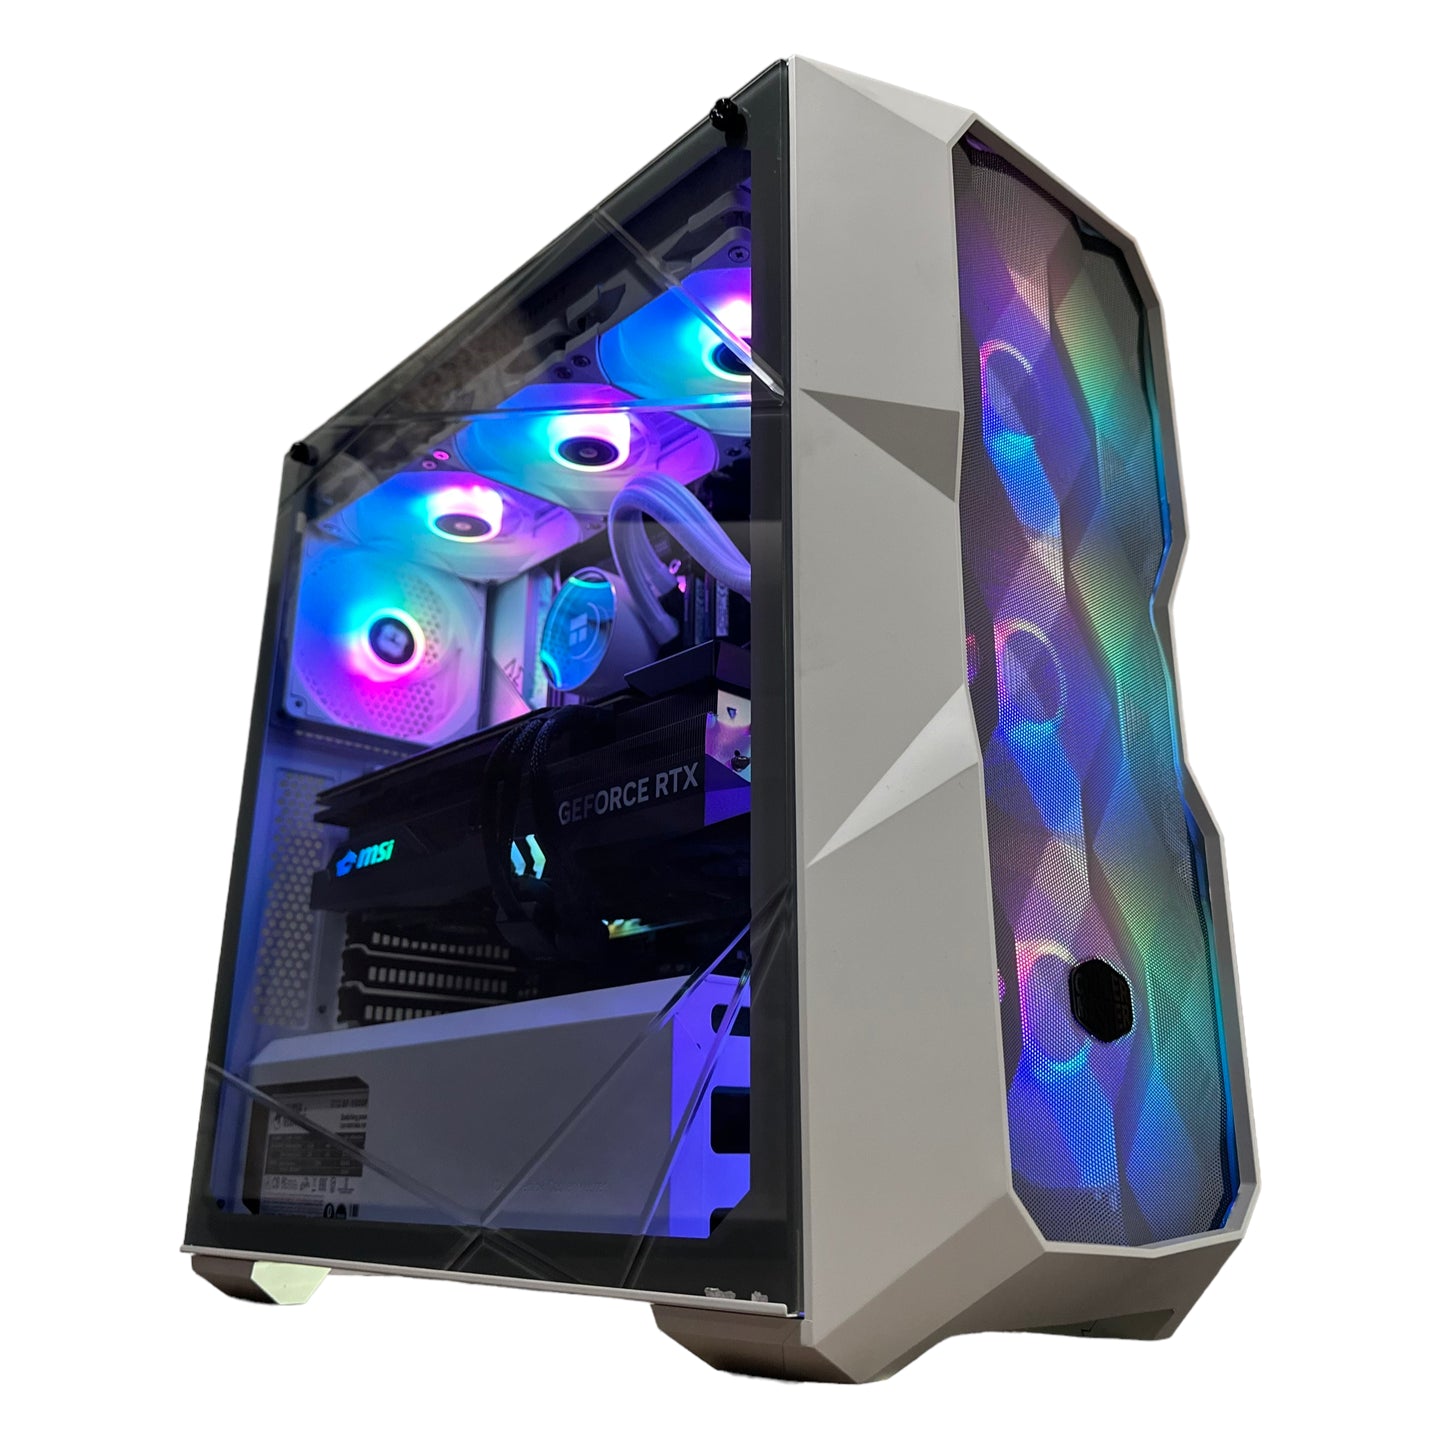 Top Tier High End 16-Core Gaming PC, i7-13700KF (Better than i9-12900K), RTX 4090 24GB, 64GB 3200mhz DDR4 RAM, 2TB GEN 4 NVME SSD, 8TB HDD (Options), WIFI + BT